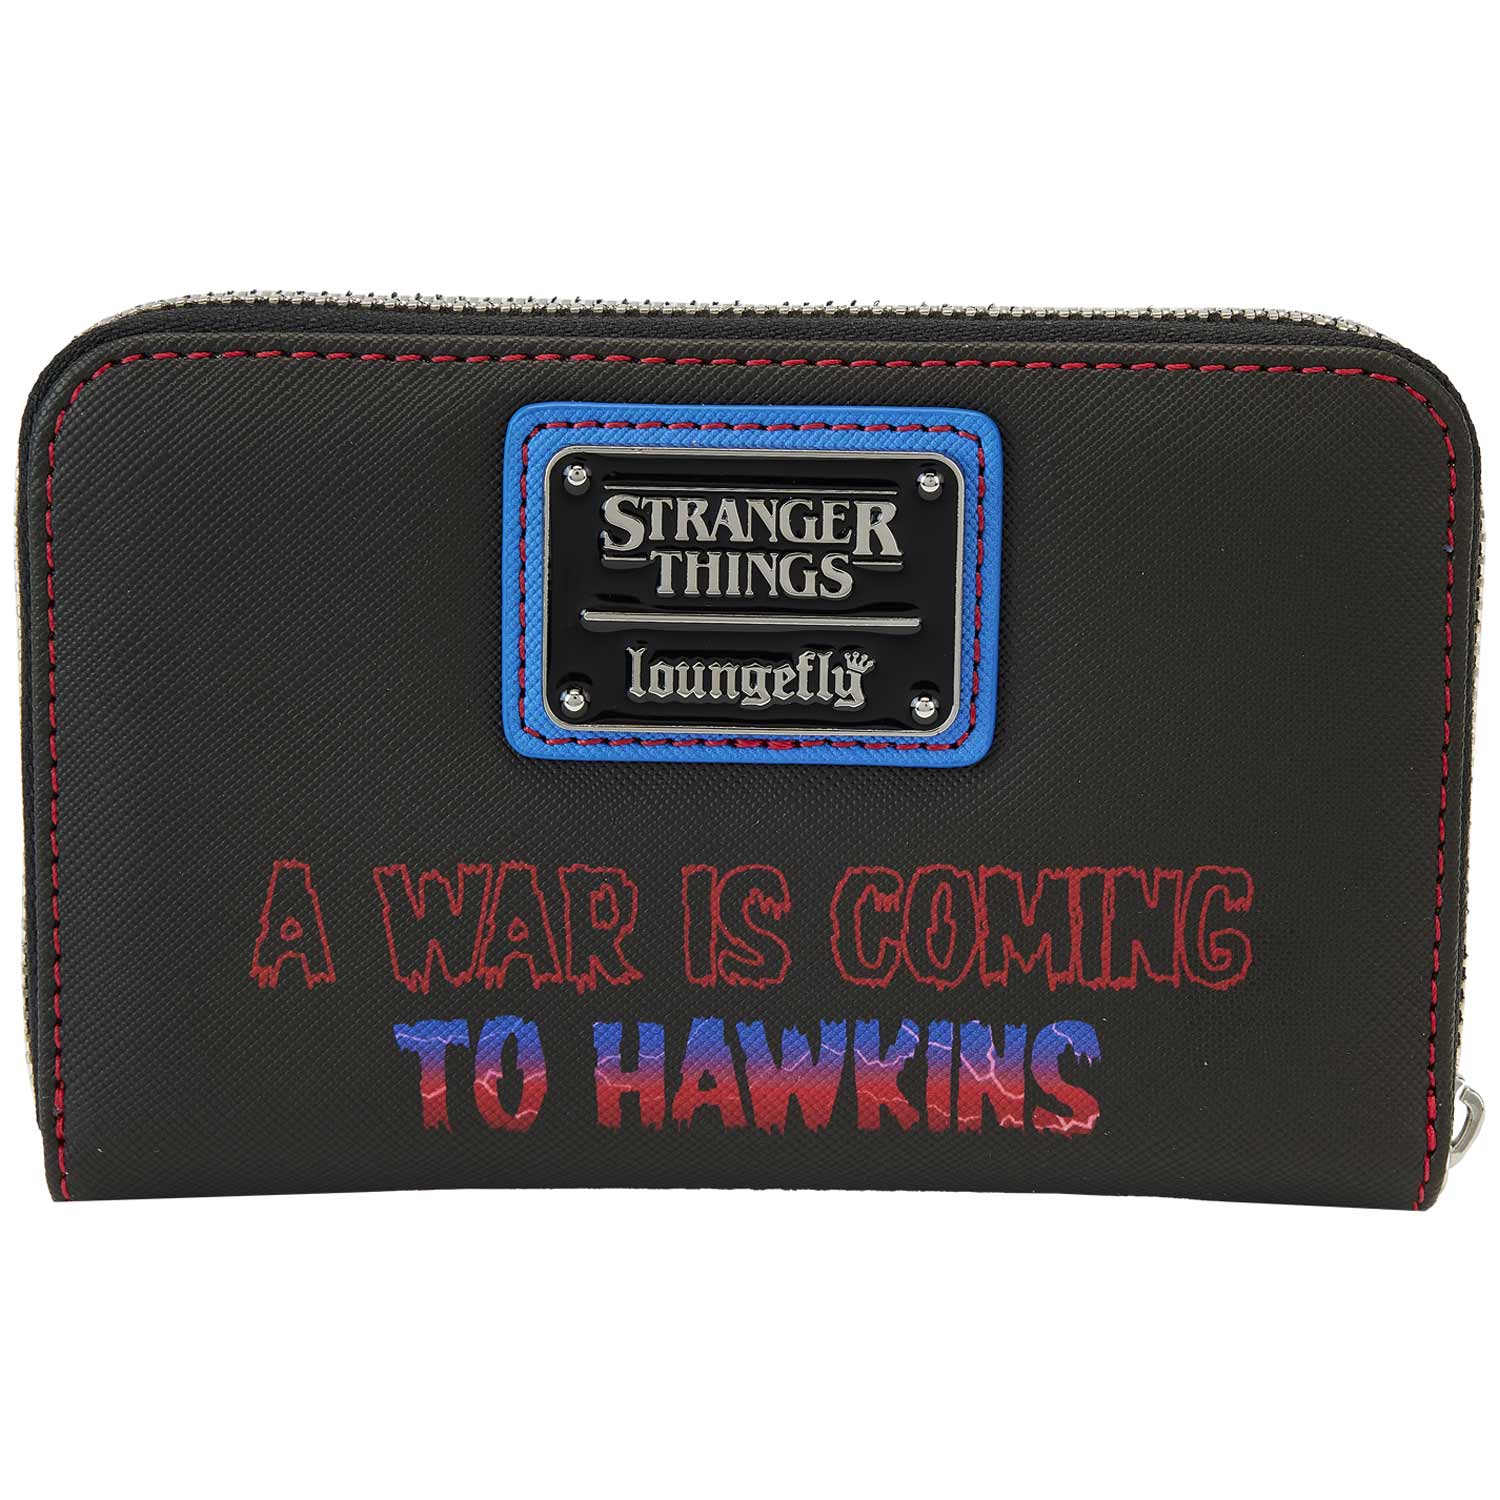 Loungefly x Netflix Stranger Things Upside Down Wallet